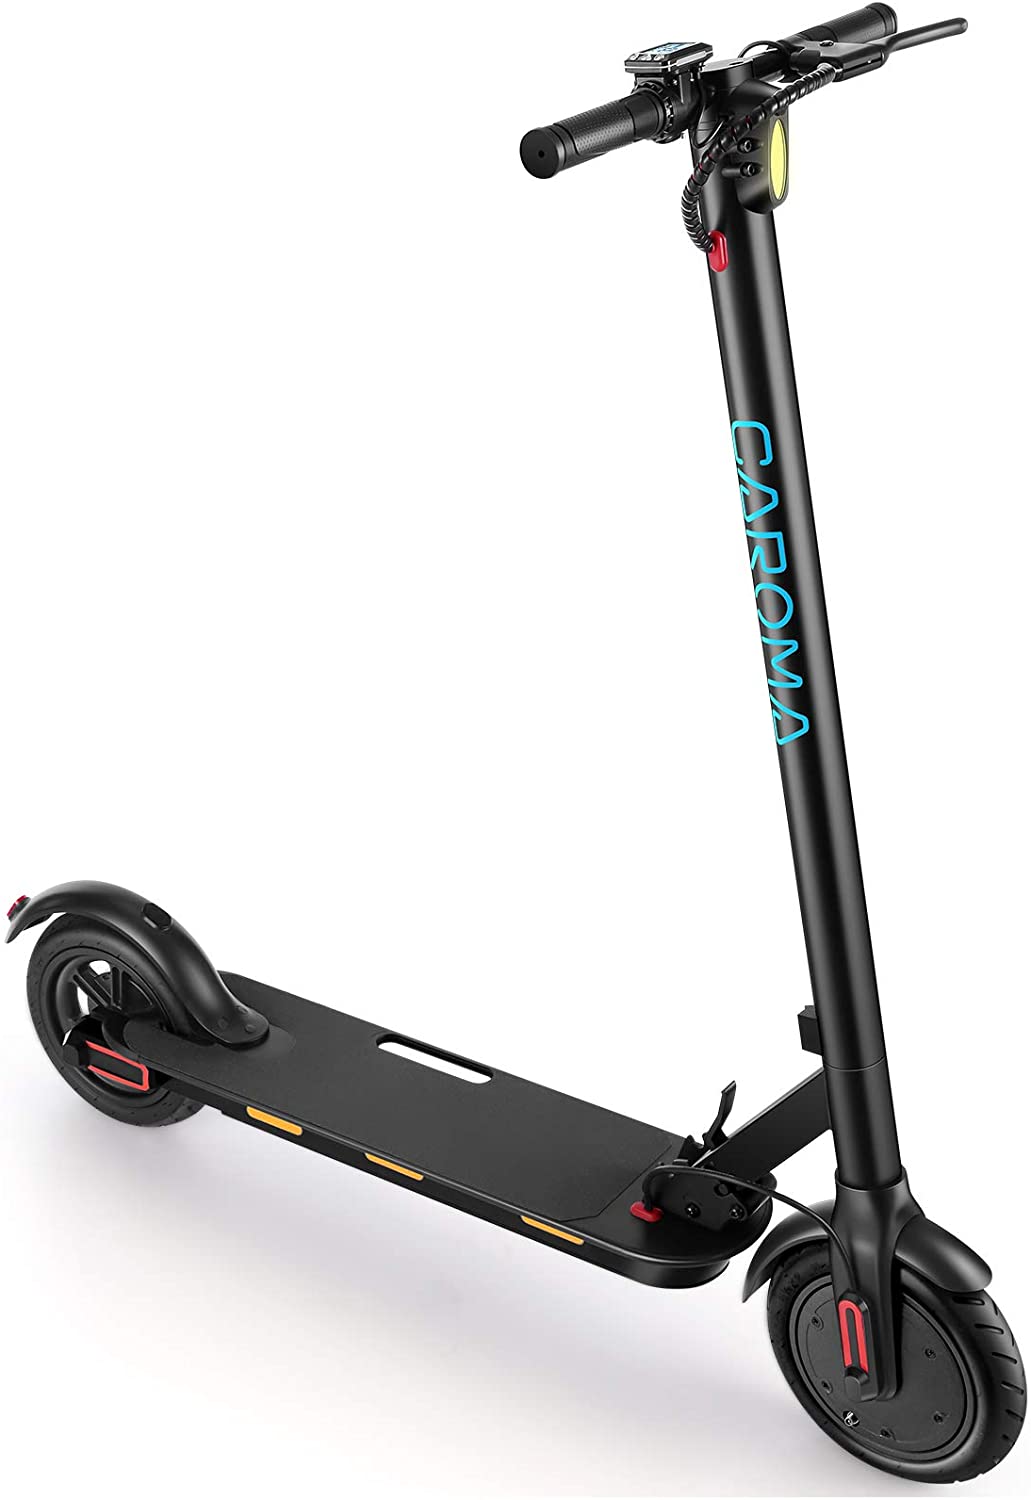 Details about   CAROMA 350W /250W Electric Foldable Scooter 18.6 Miles Range Cruise Portable 